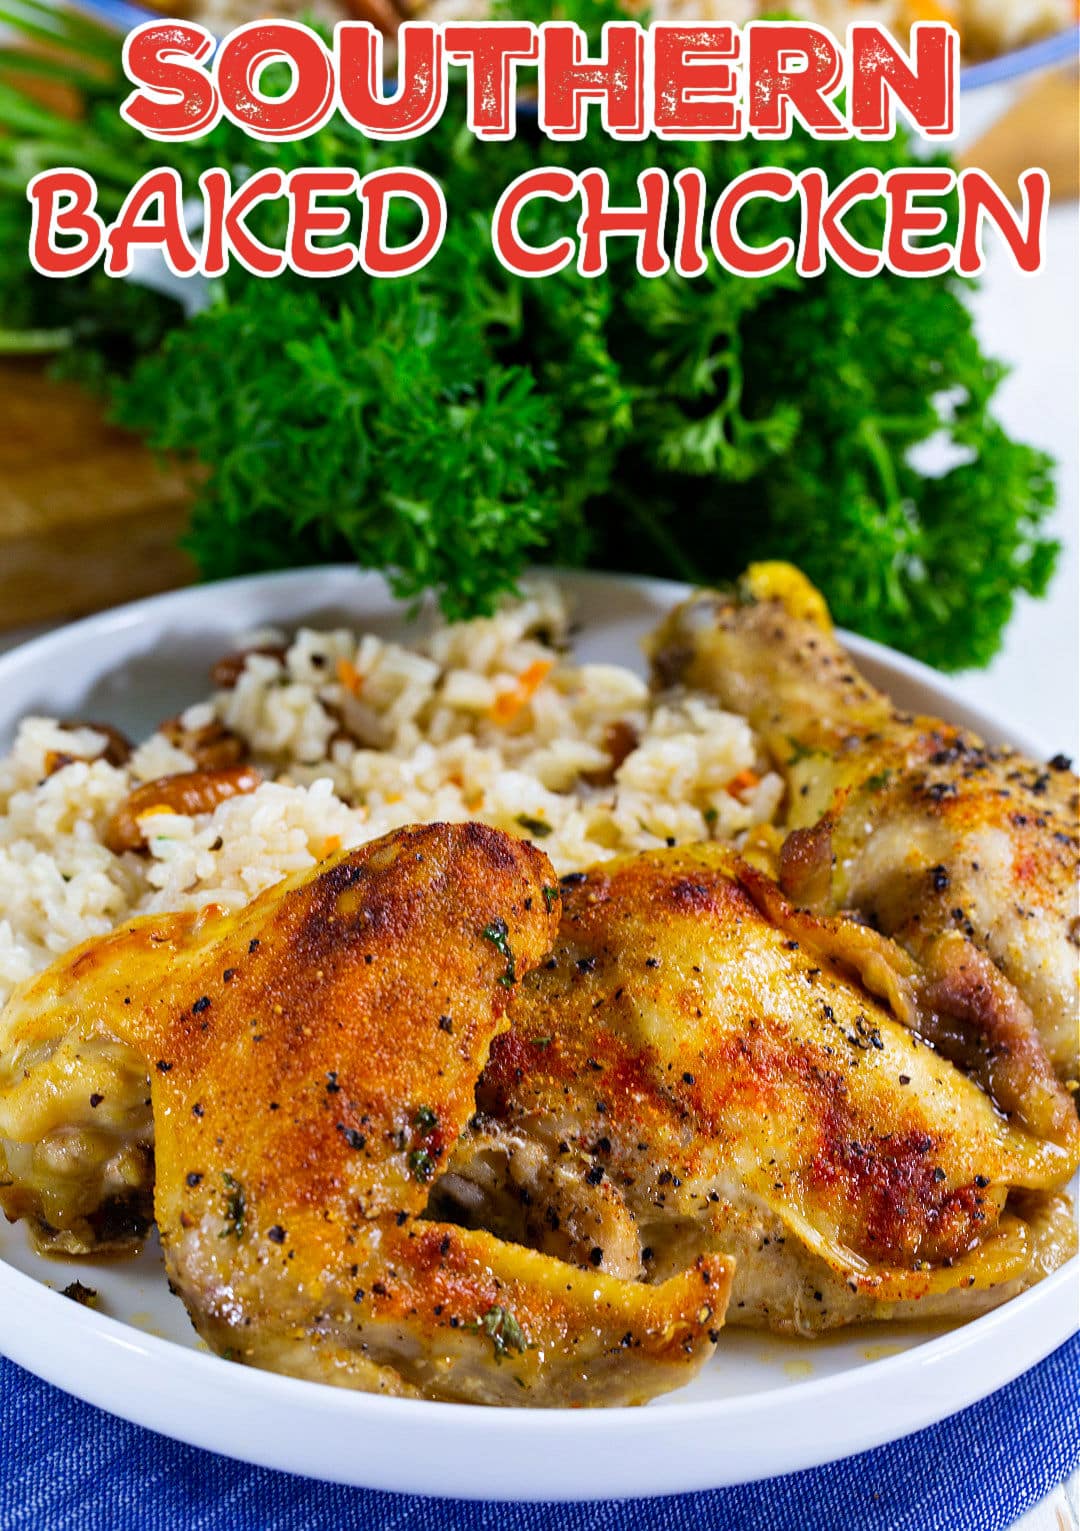 Southern Baked Chicken on plate with rice.